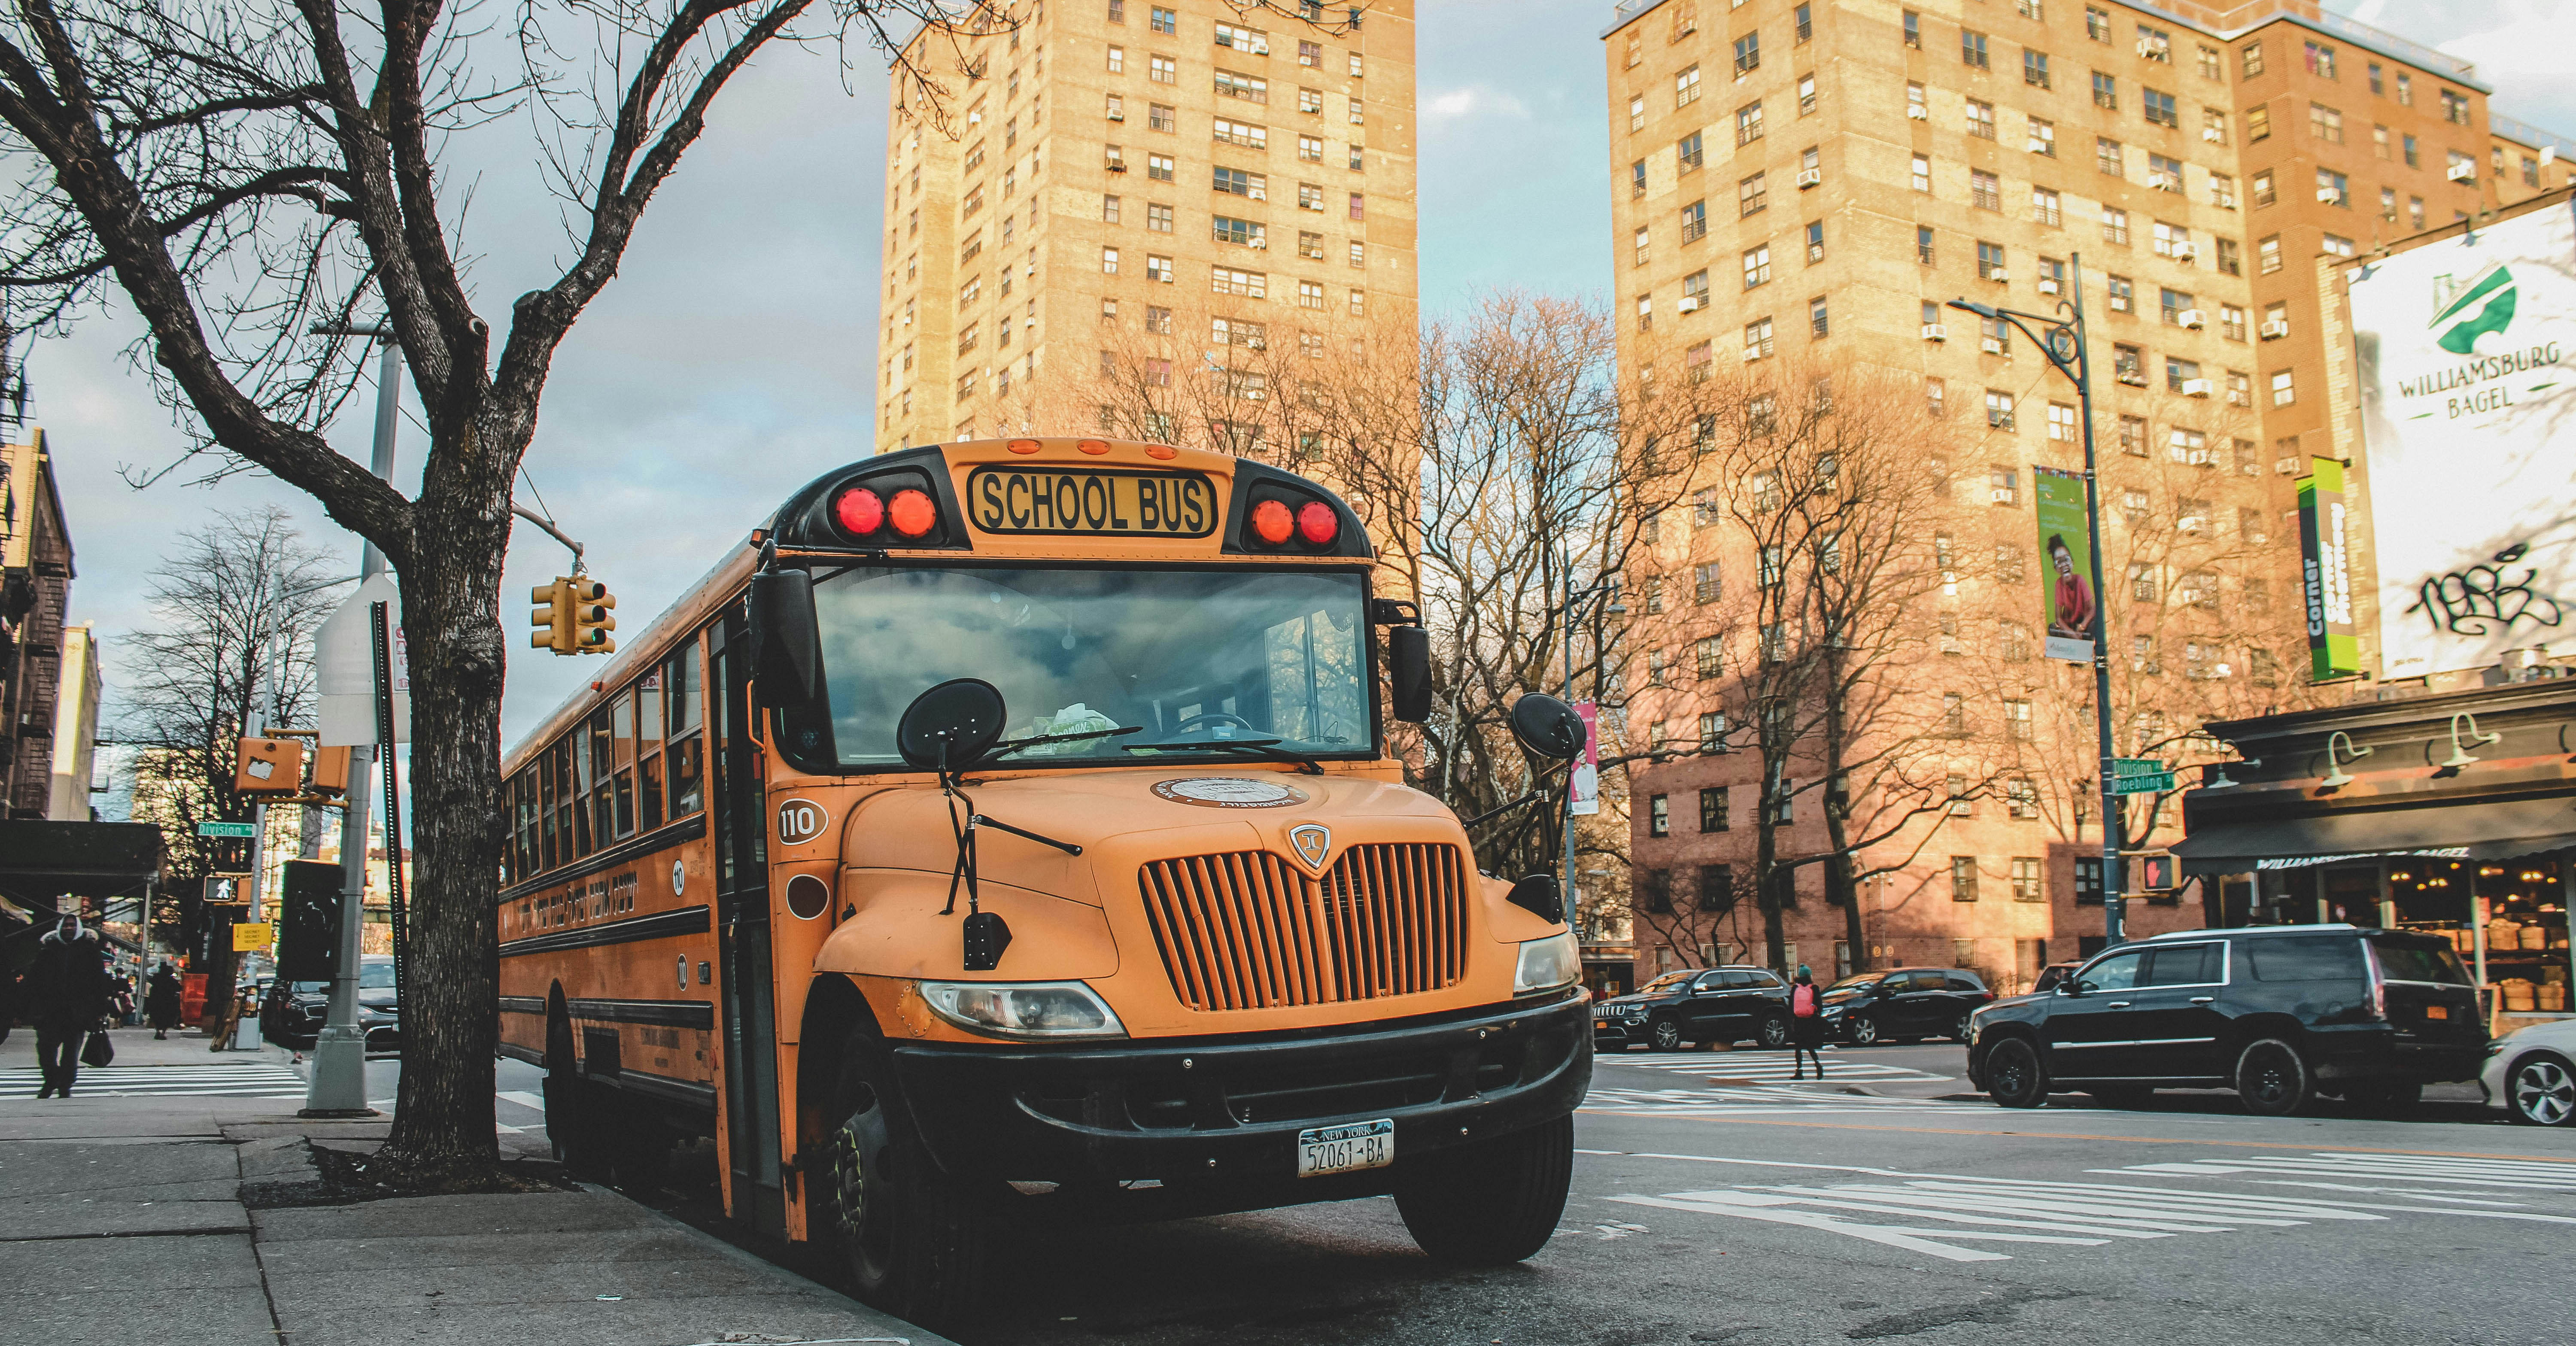 A school bus parked on the side of a street in a busy city.